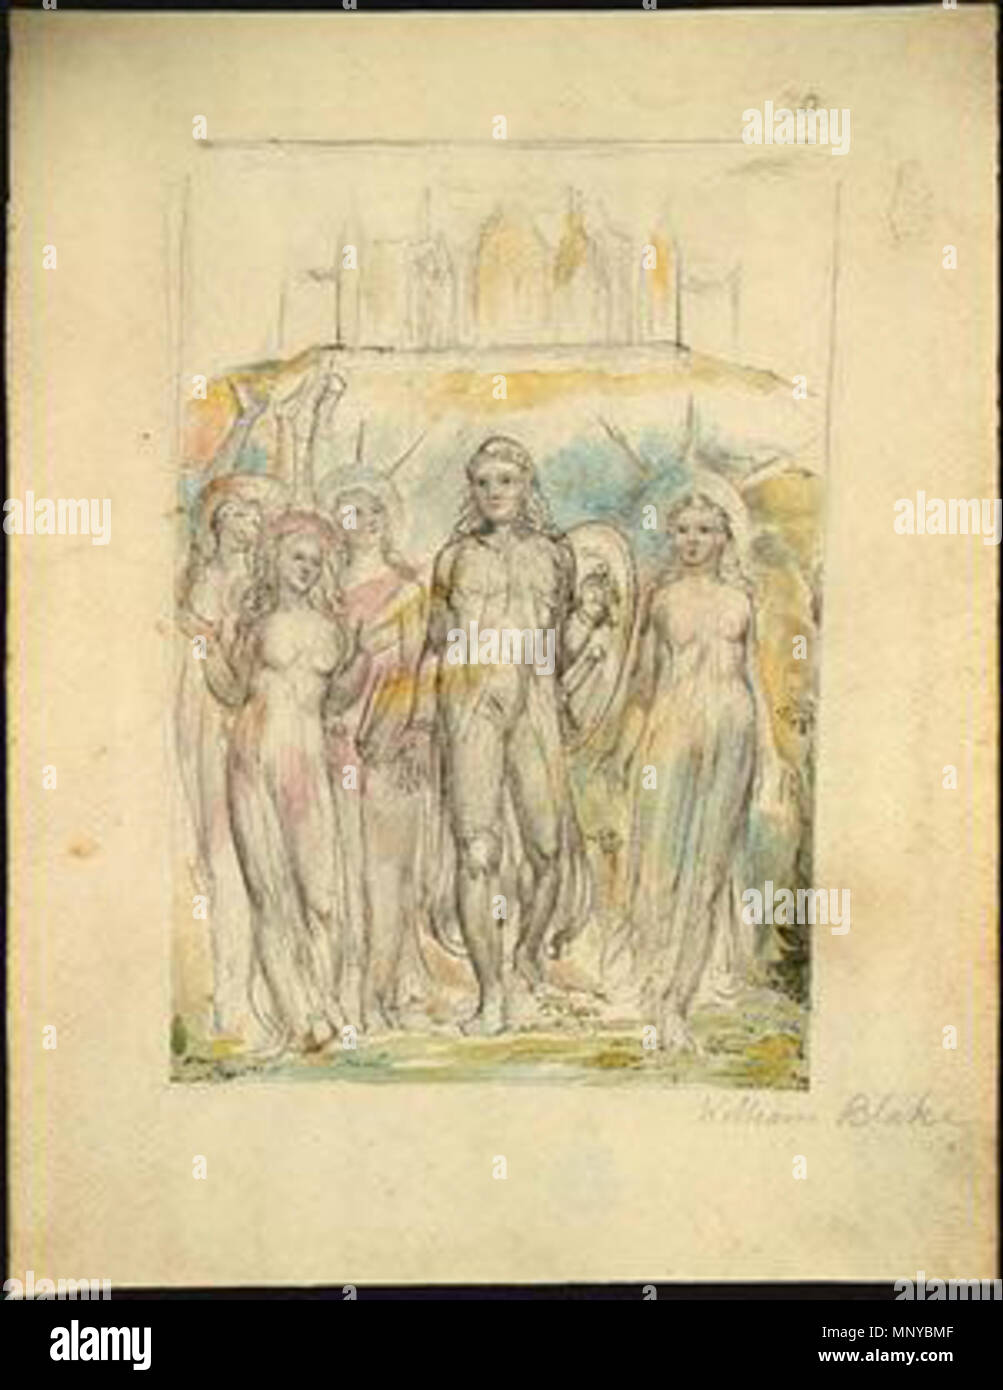 . English: William Blake - Christian with the shield of faith . 26 June 2013, 23:40:02.   William Blake  (1757–1827)       Alternative names W. Blake; Uil'iam Bleik  Description British painter, poet,, writer, theologian, collector and engraver  Date of birth/death 28 November 1757 12 August 1827  Location of birth/death Broadwick Street Charing Cross  Work location London  Authority control  : Q41513 VIAF: 54144439 ISNI: 0000 0001 2096 135X ULAN: 500012489 LCCN: n78095331 NLA: 35019221 WorldCat     This is a faithful photographic reproduction of a two-dimensional, public domain work of art. T Stock Photo